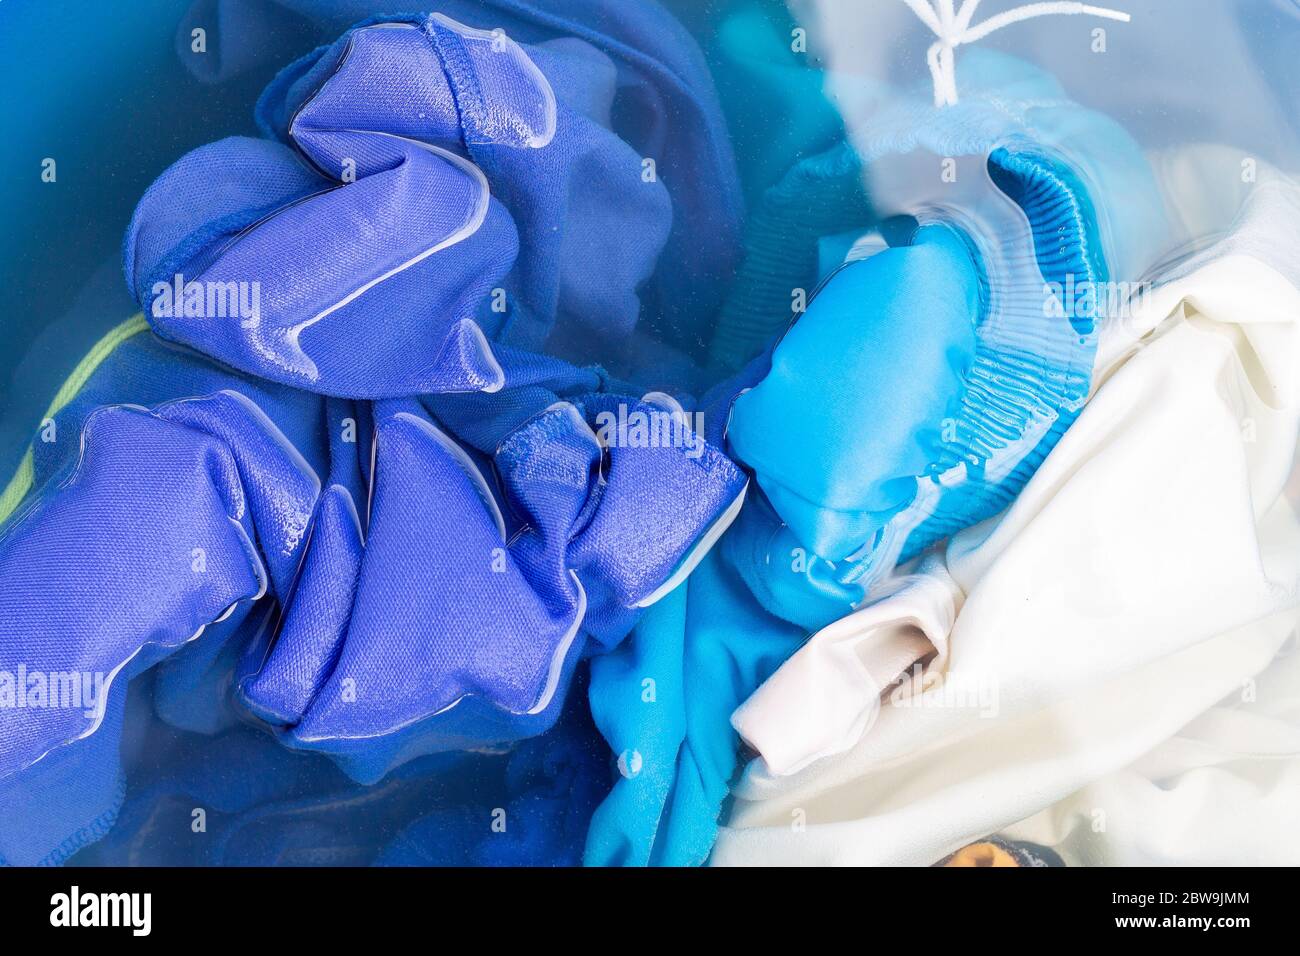 Soak colored clothes before washing them with water. Stock Photo